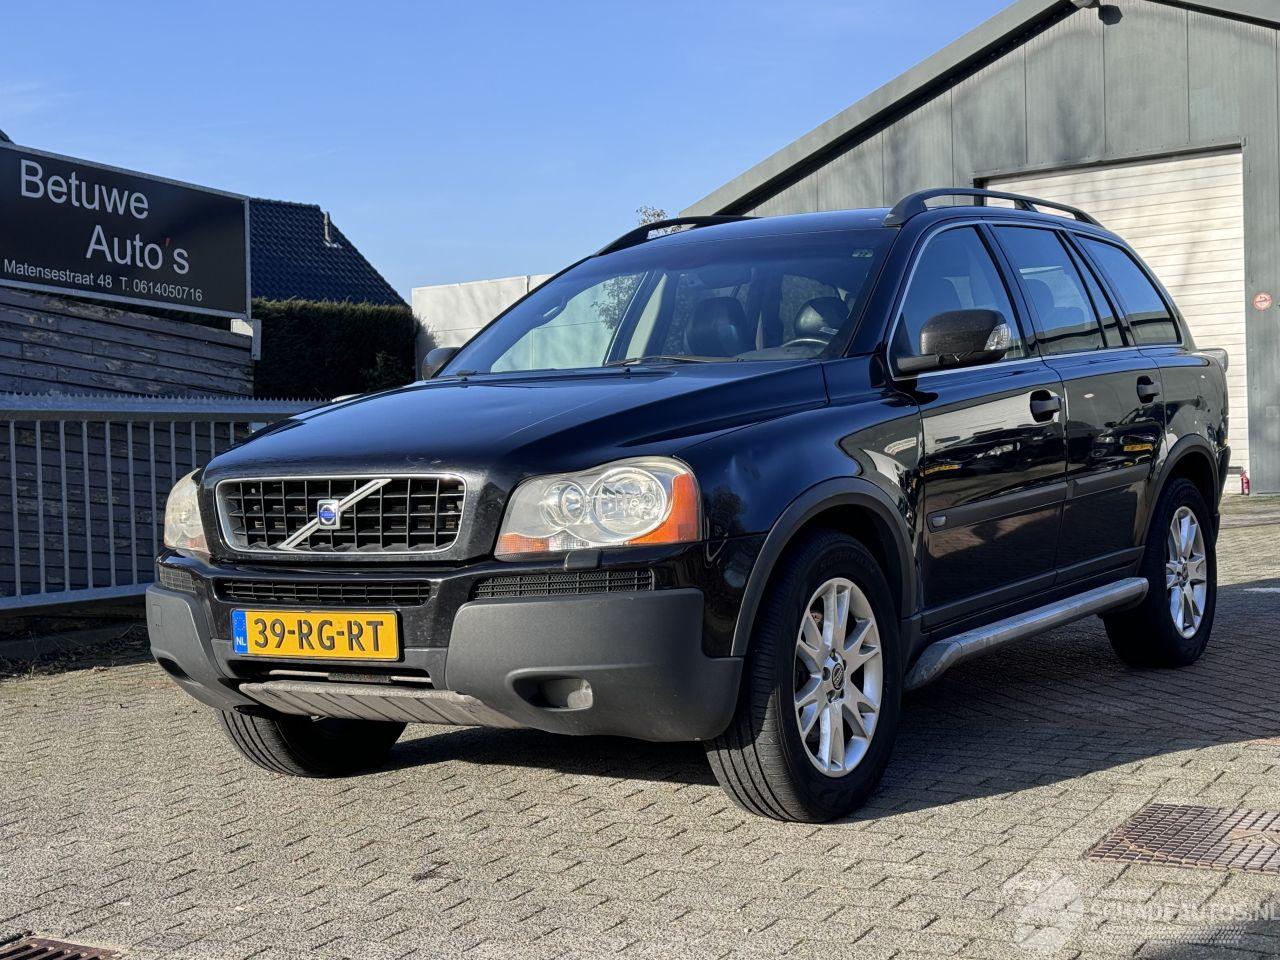 Volvo Xc-90 2.4 D5 7-PERS